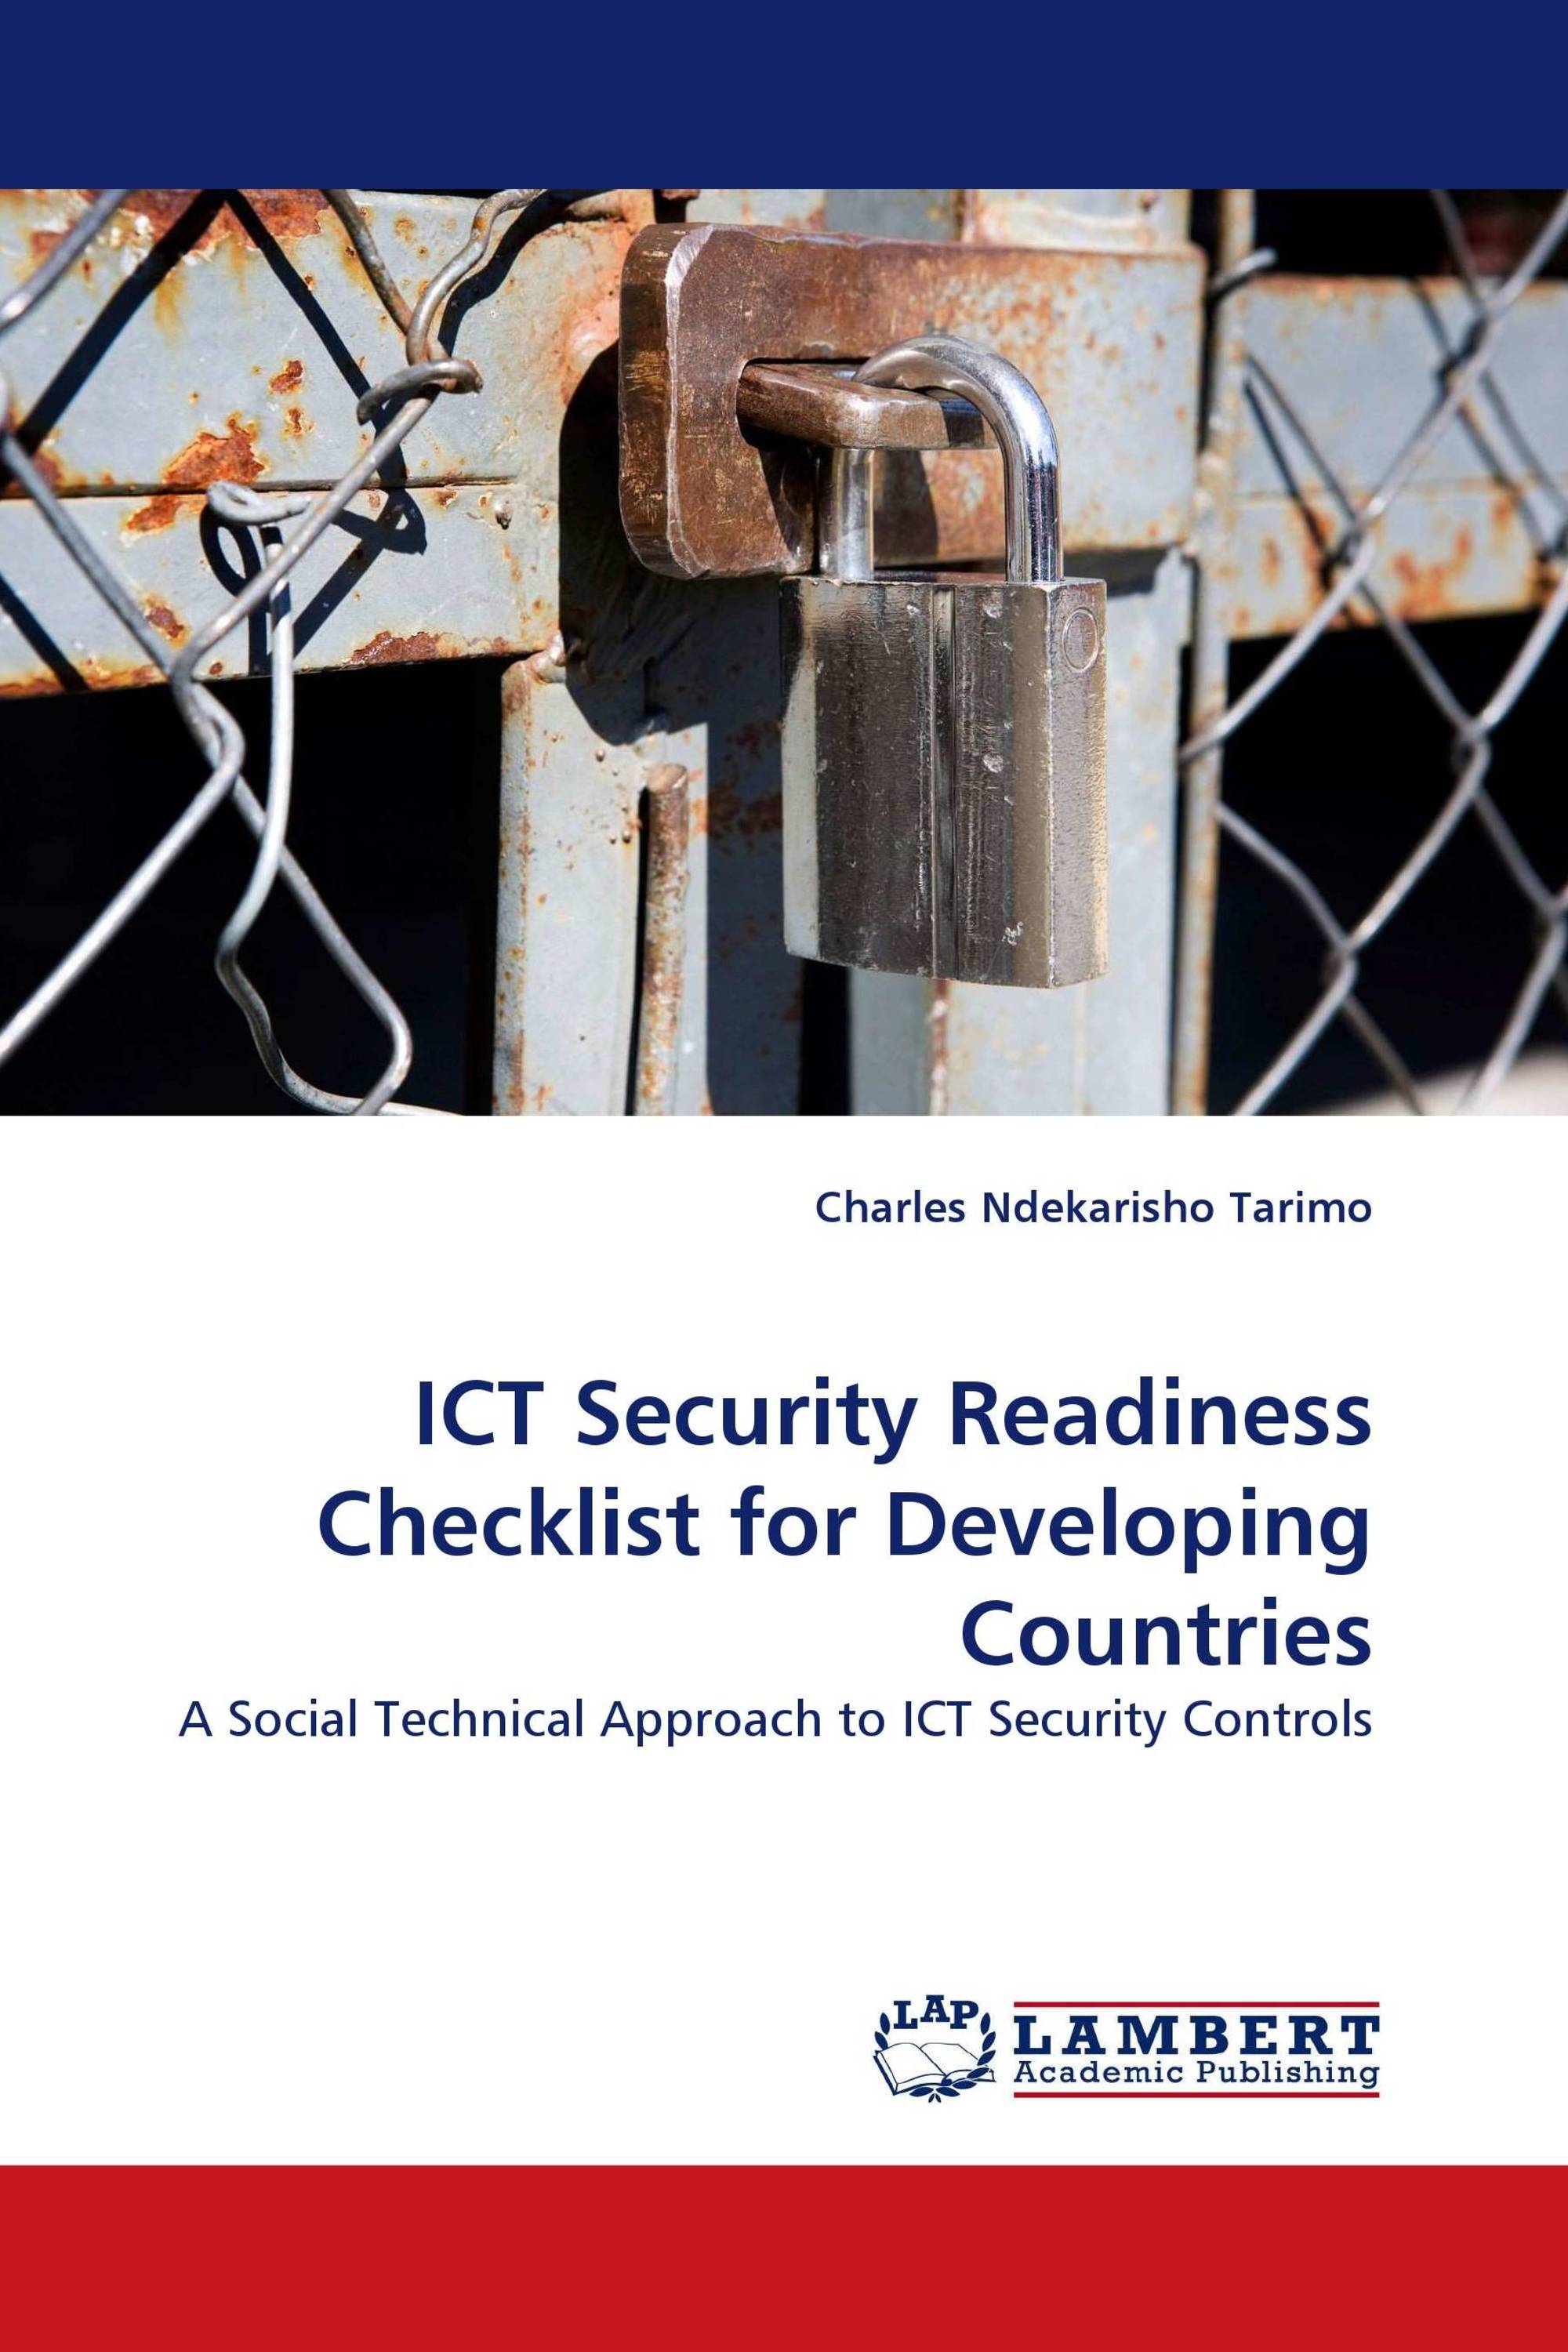 ICT Security Readiness Checklist for Developing Countries